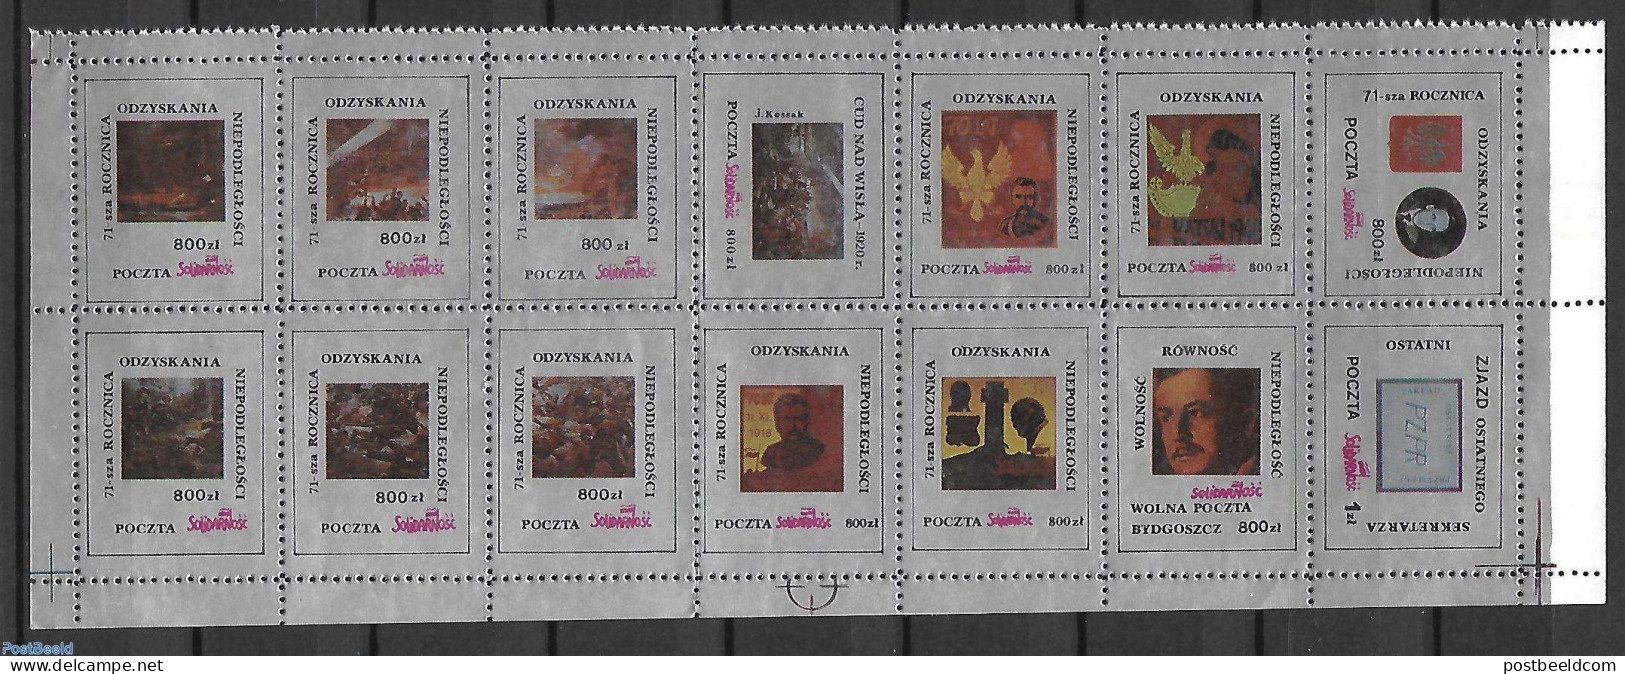 Poland 1981 Solidarnosc, Not Postage Valid., Mint NH - Unused Stamps